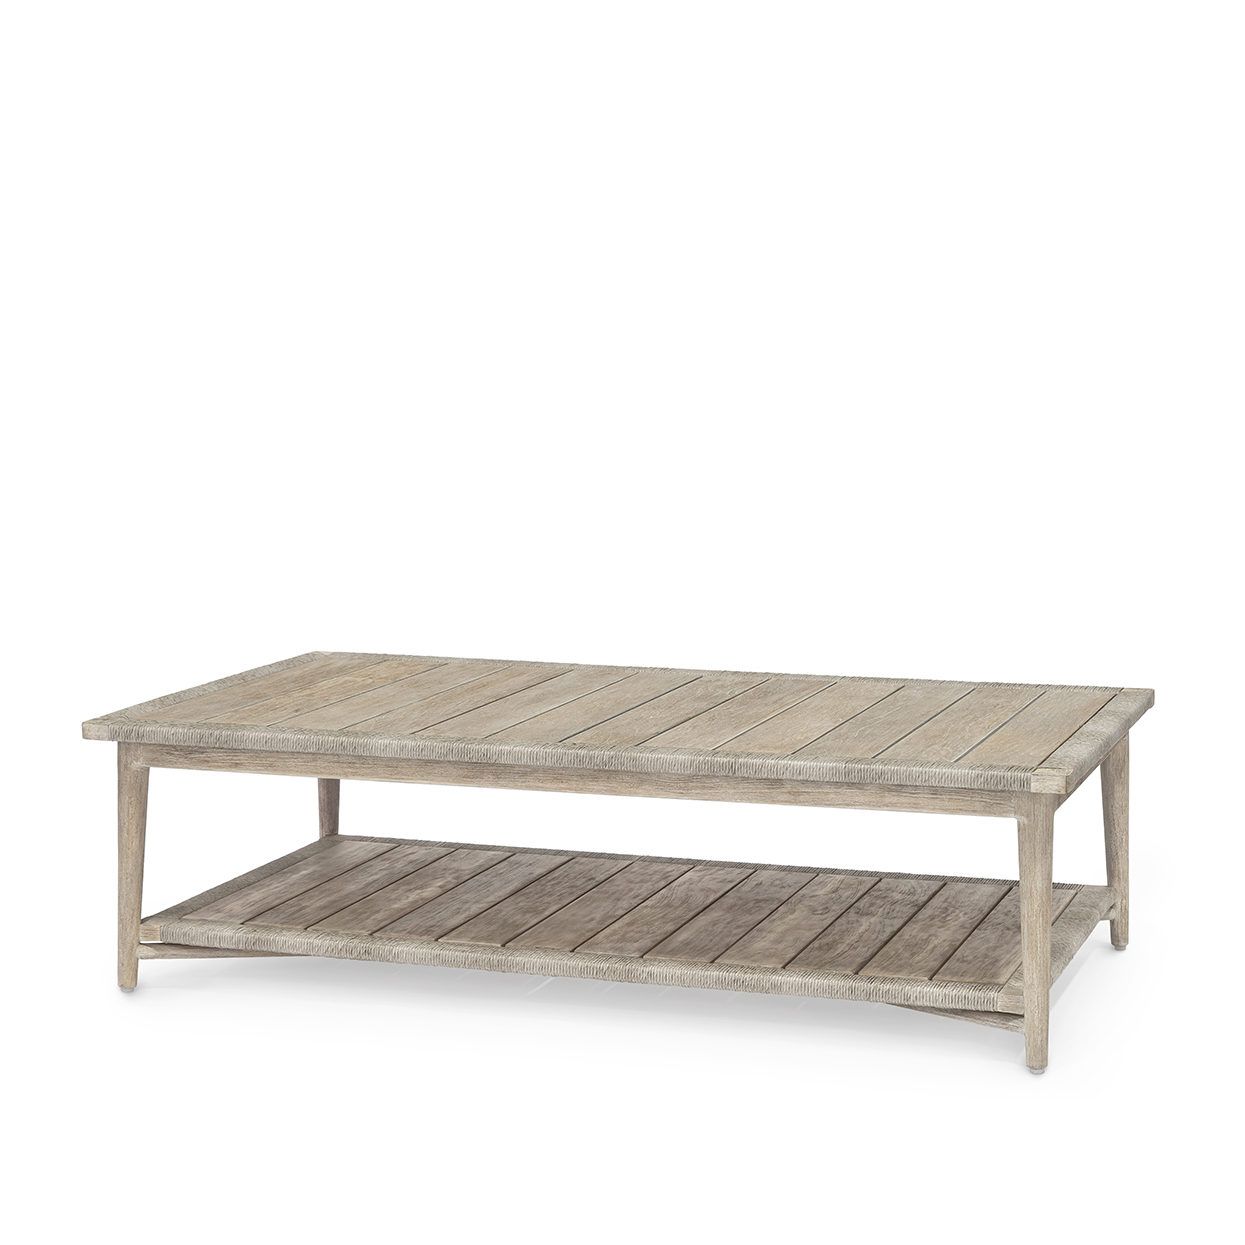 Teak And Abaca Woven Outdoor Coffee Table – Mecox Gardens Throughout Woven Paths Coffee Tables (Gallery 18 of 20)